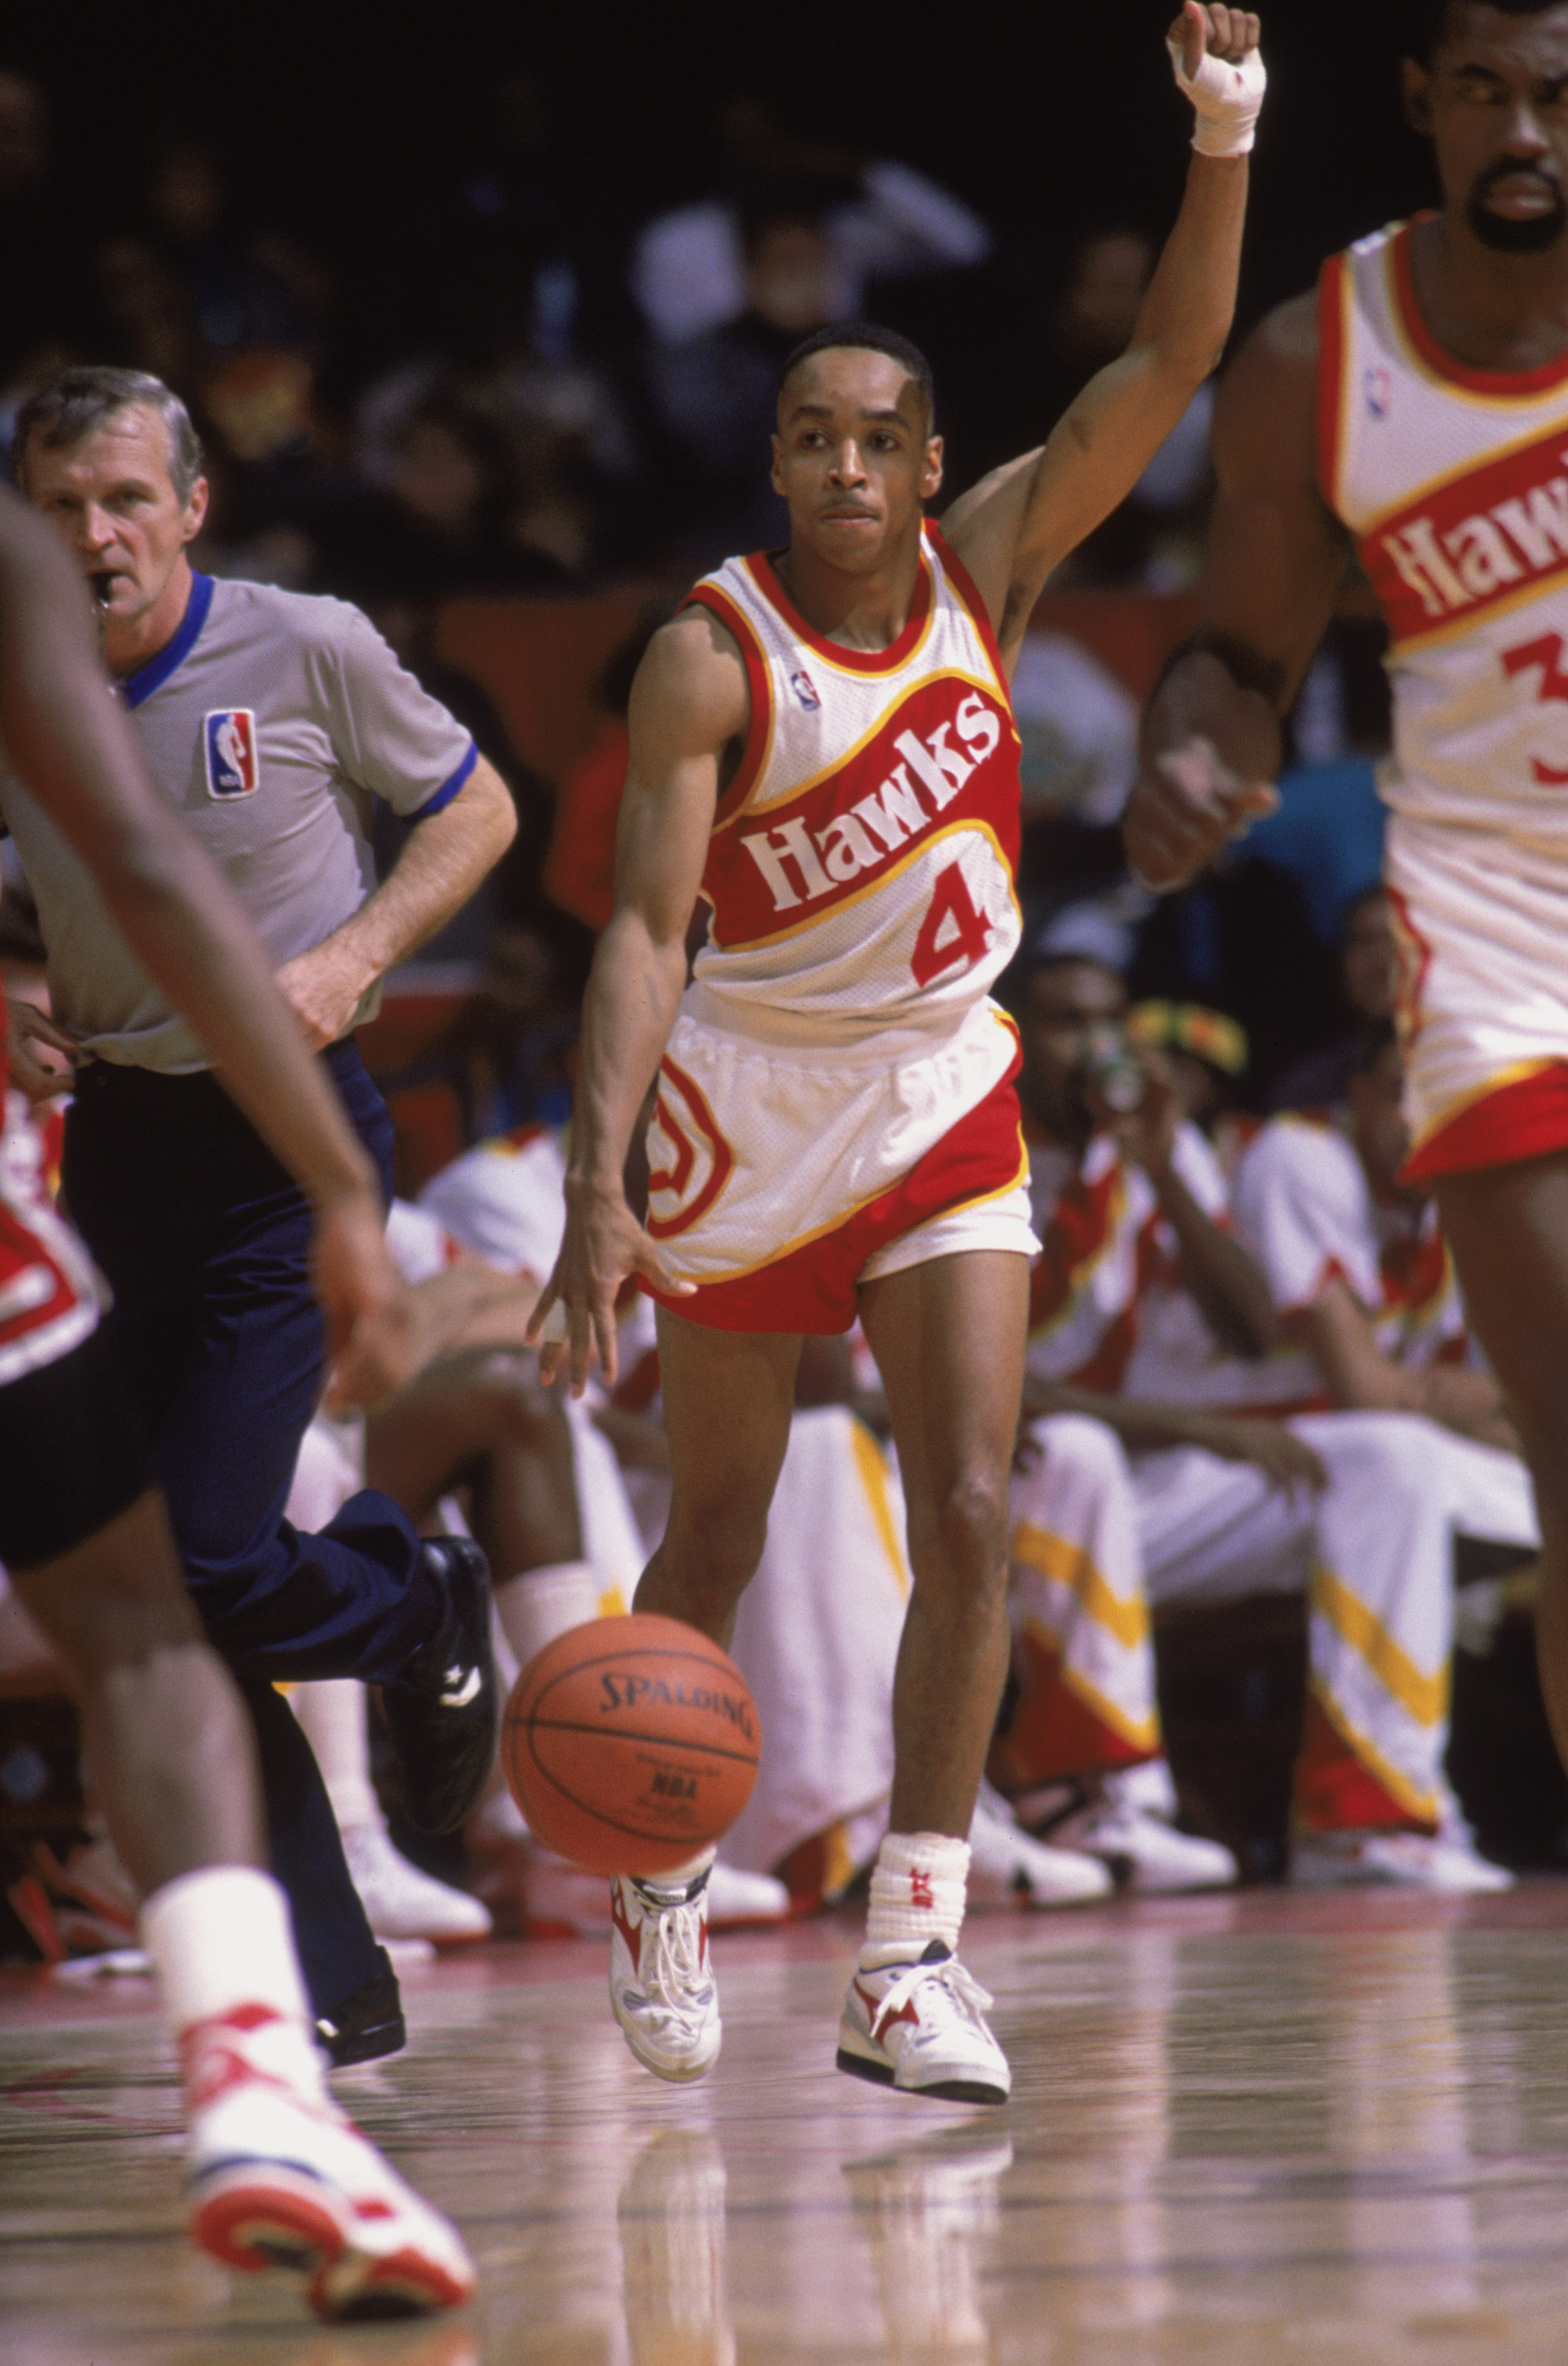 CHICAGO - 1989:  Spud Webb #4 of the Atlanta Hawks dribbles the ball during a NBA game against the Chicago Bulls at Chicago Stadium in Chicago, Illinois in 1989.  (Photo by Rick Stewart/Getty Images)